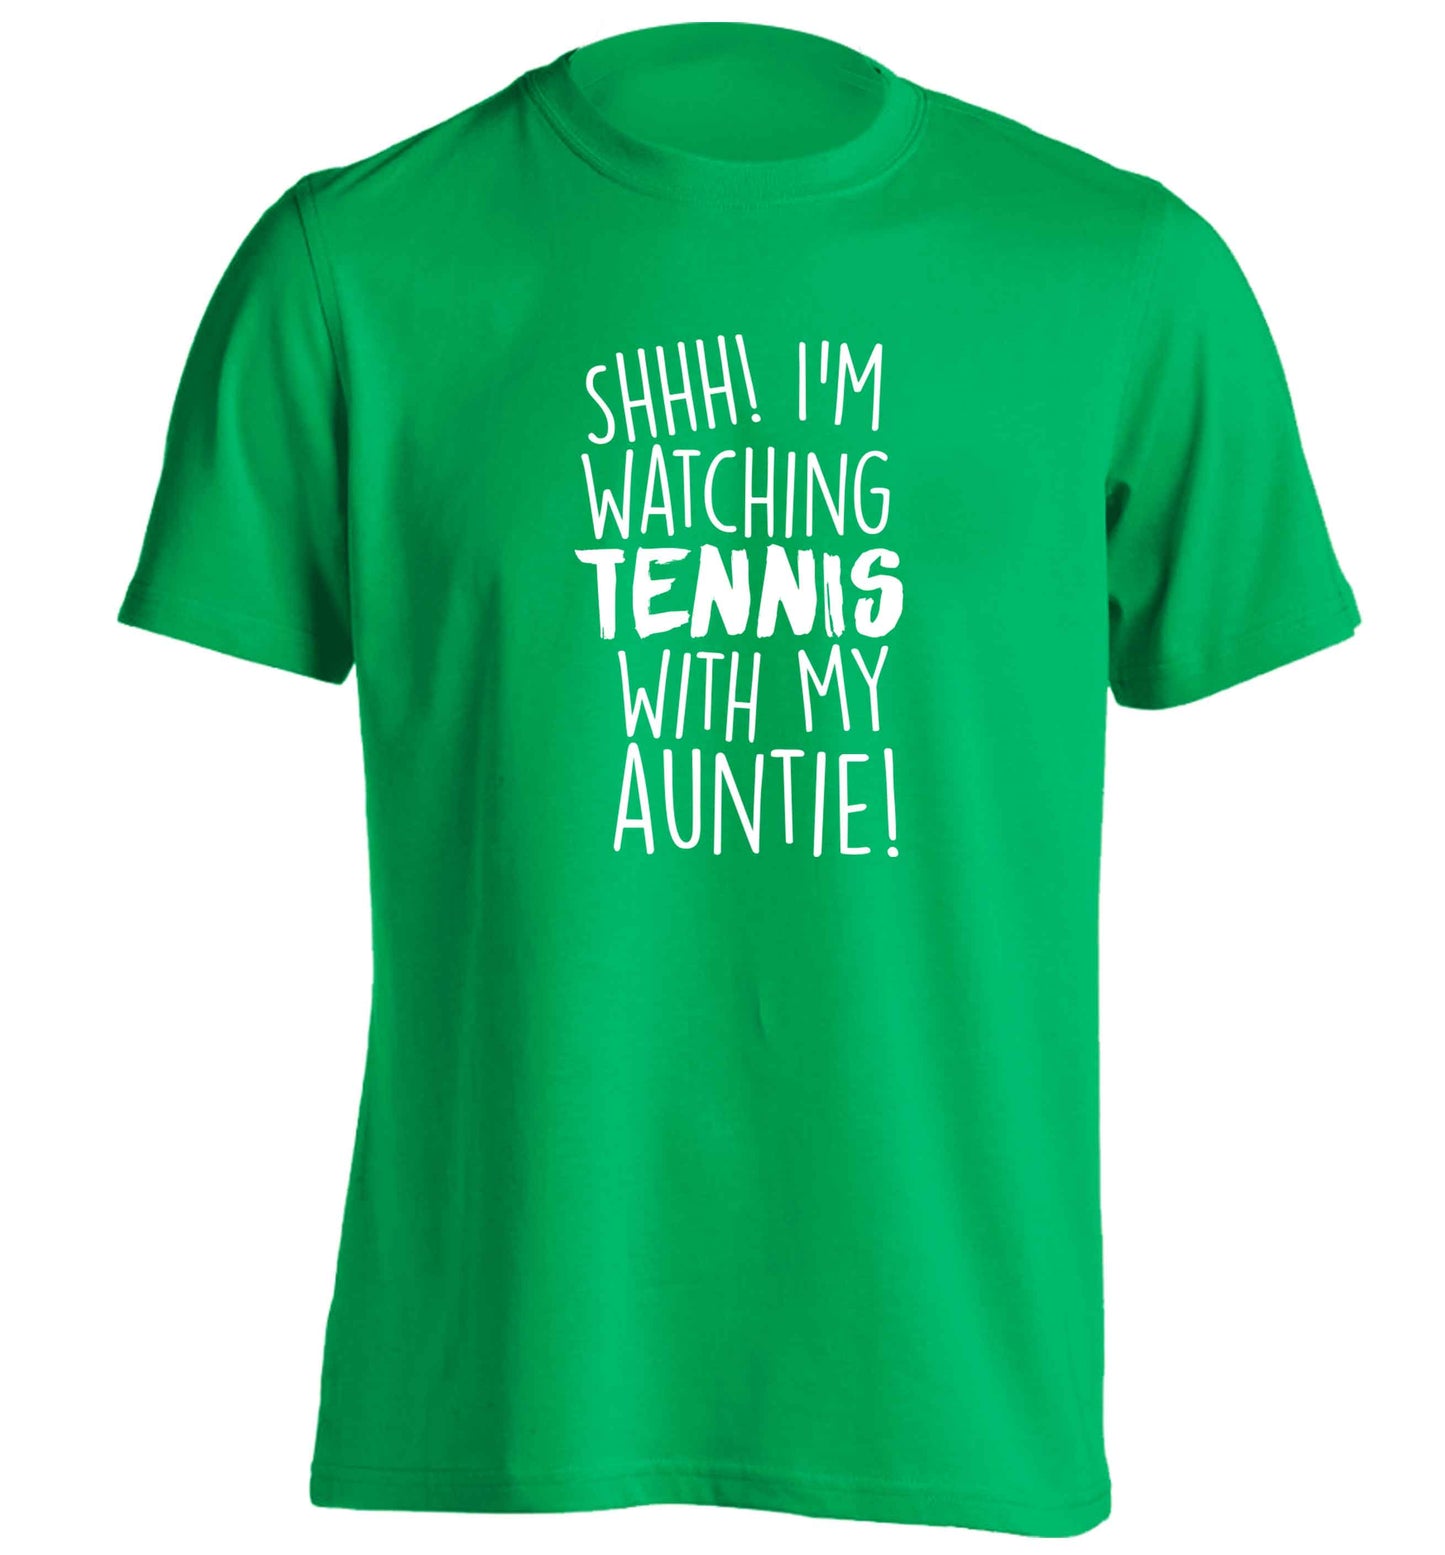 Shh! I'm watching tennis with my auntie! adults unisex green Tshirt 2XL